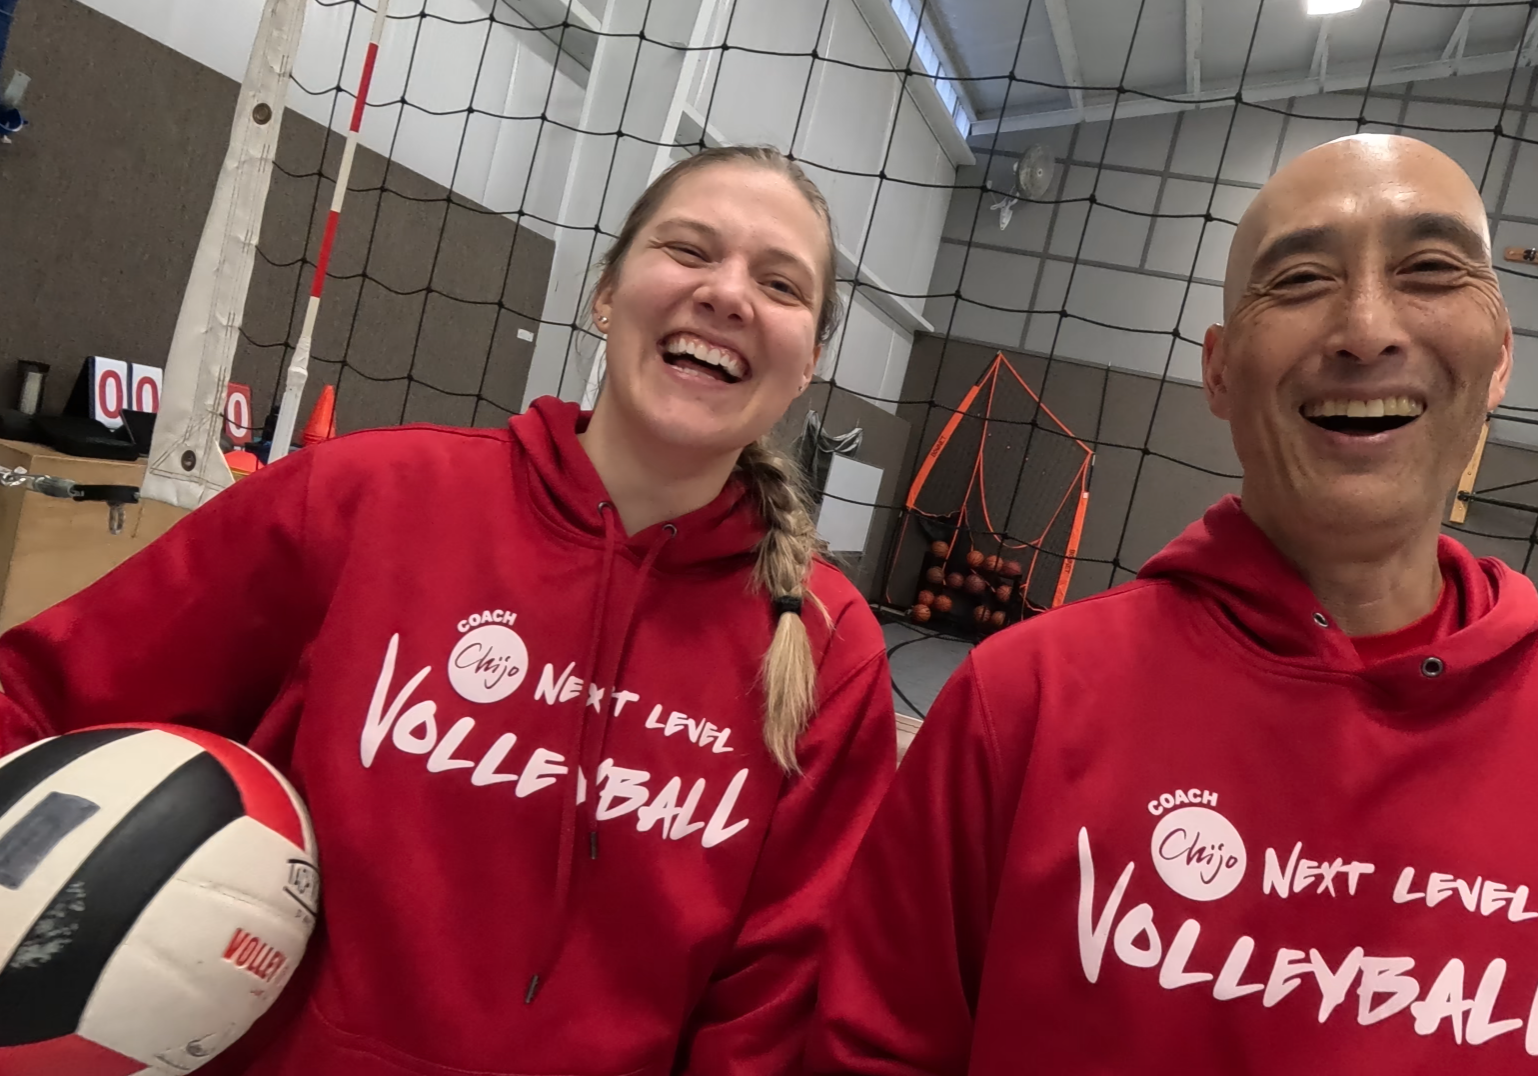 Volleyball coaches chijo and monica